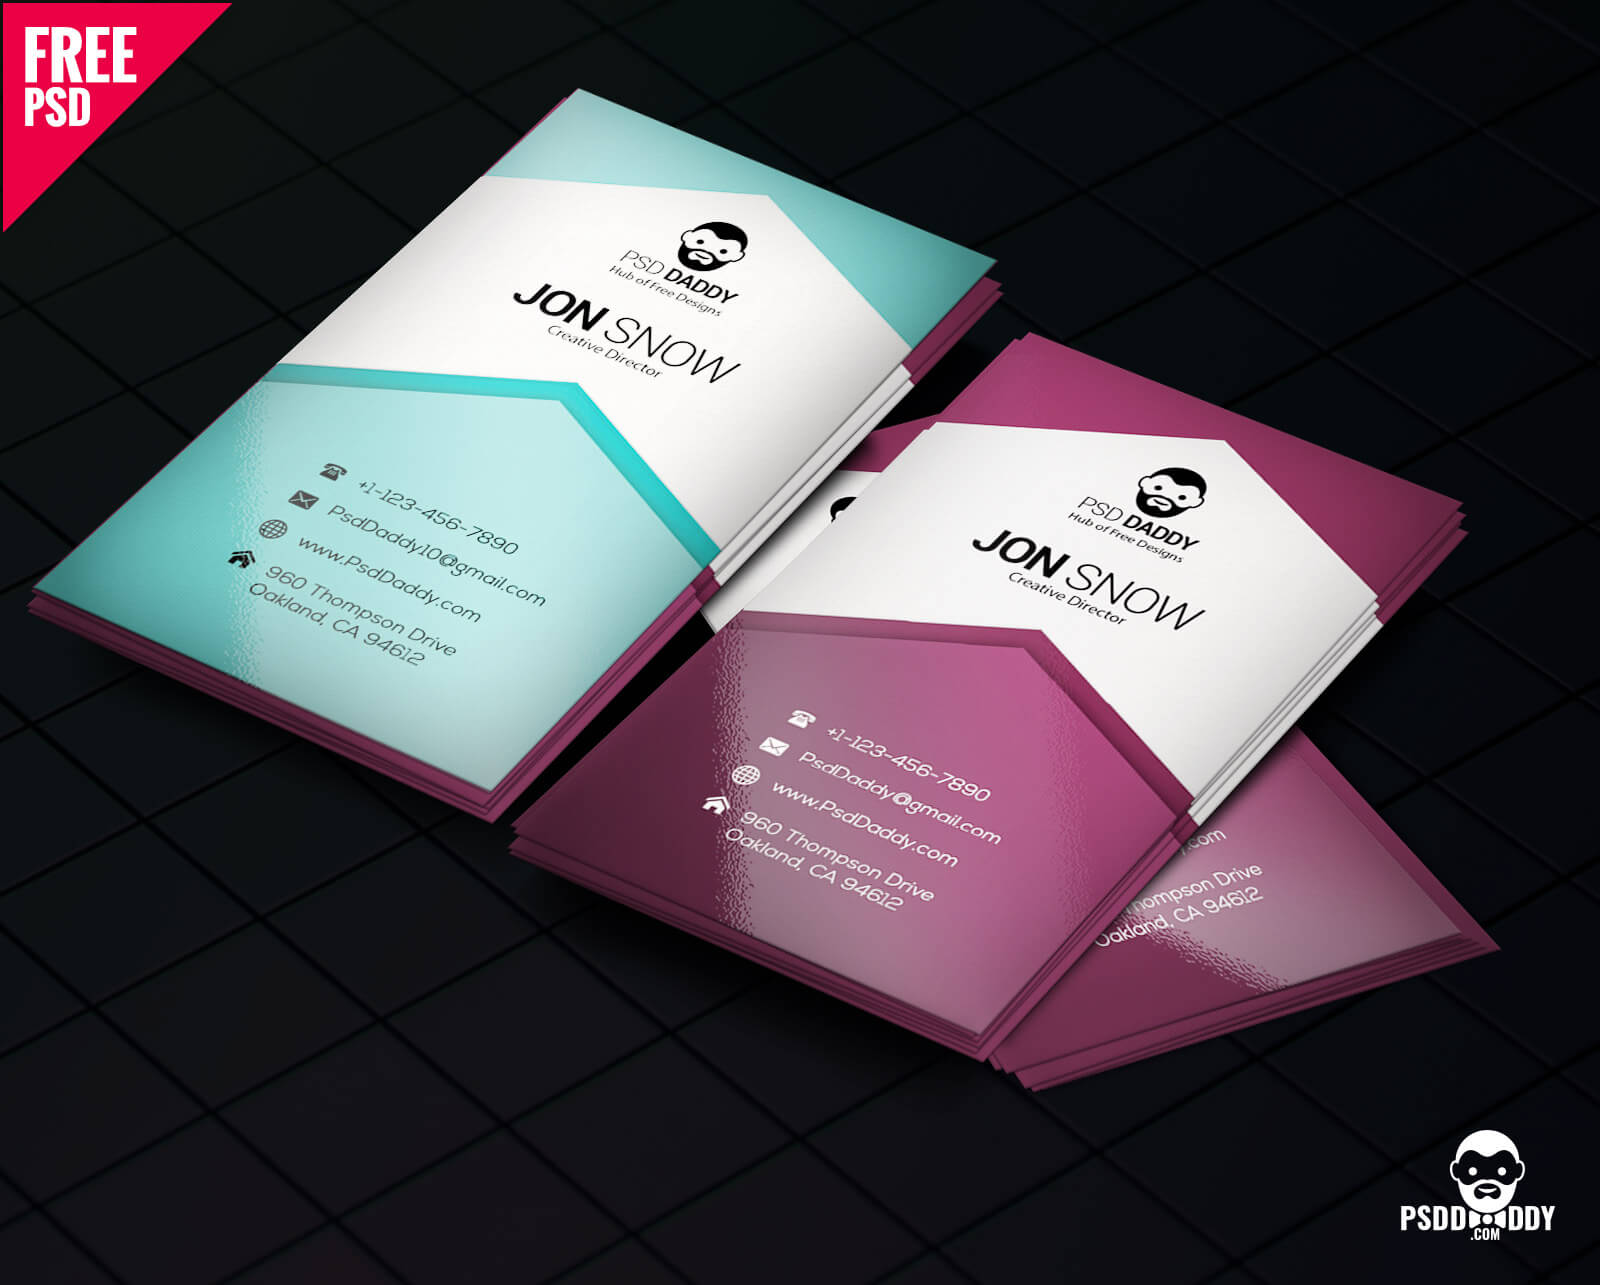 Download]Creative Business Card Psd Free | Psddaddy Throughout Visiting Card Template Psd Free Download